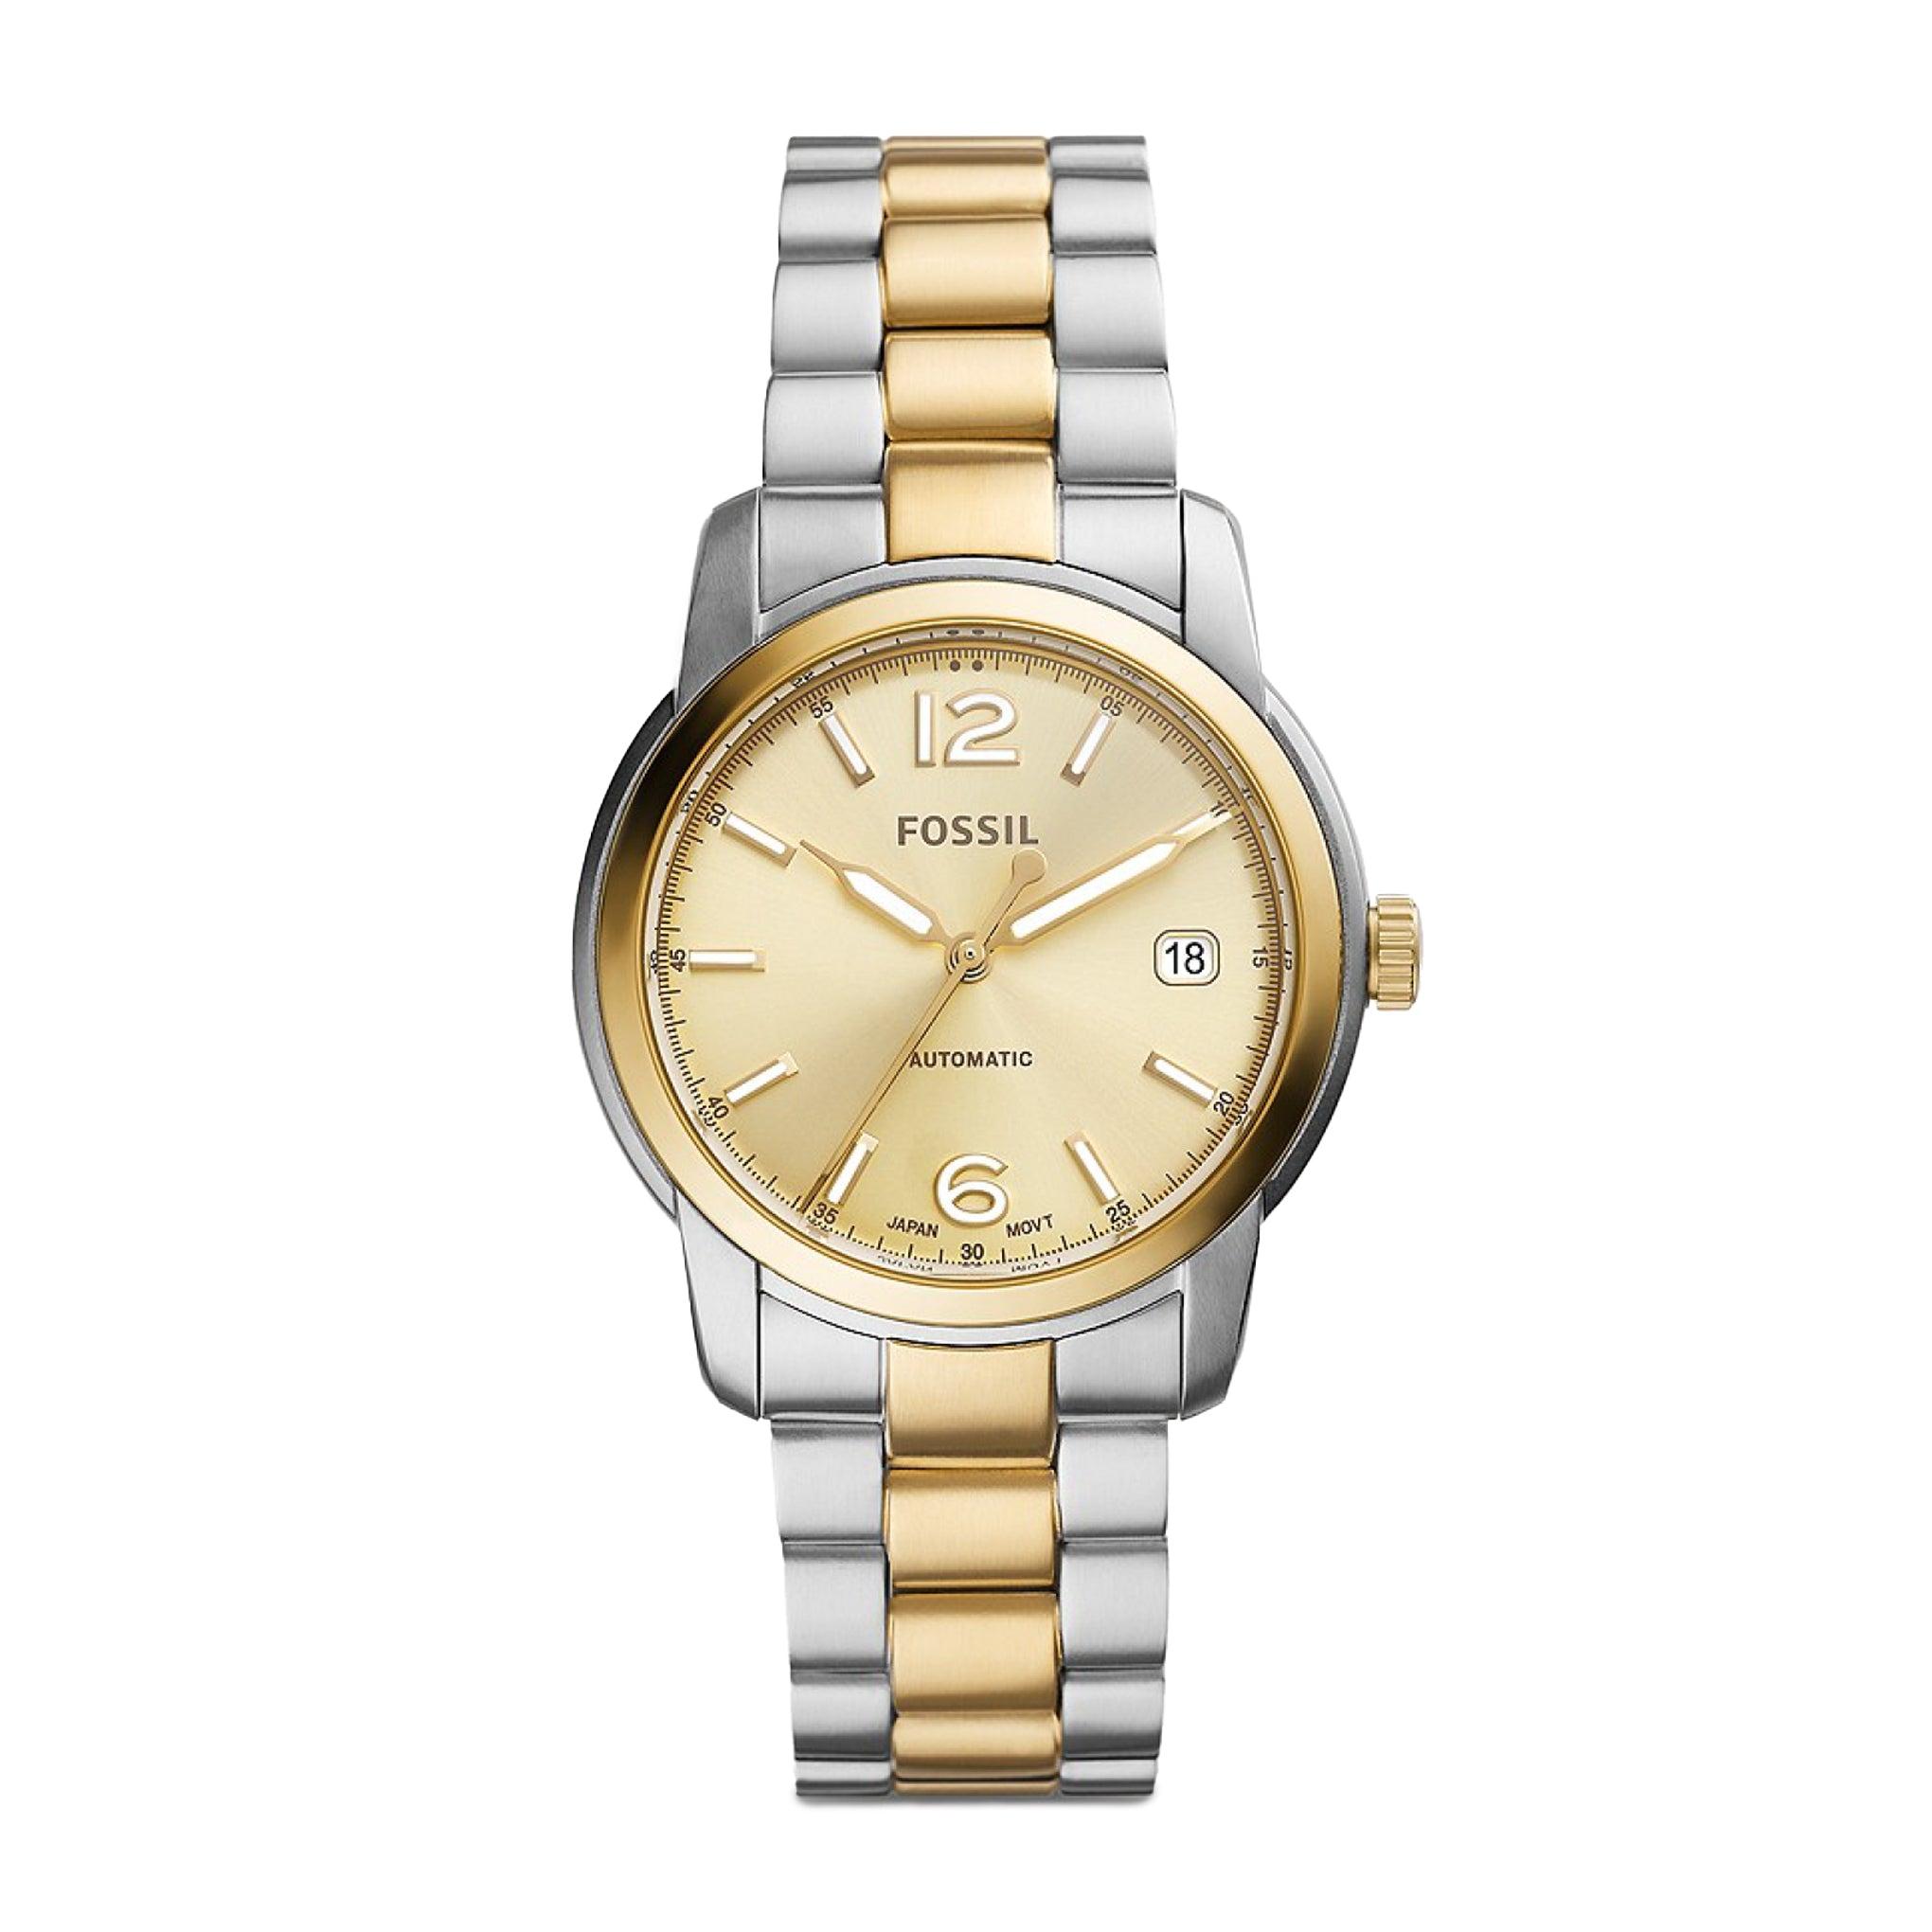 Fossil Women's Fossil Heritage Automatic Two-Tone Stainless Steel Watch Me3228